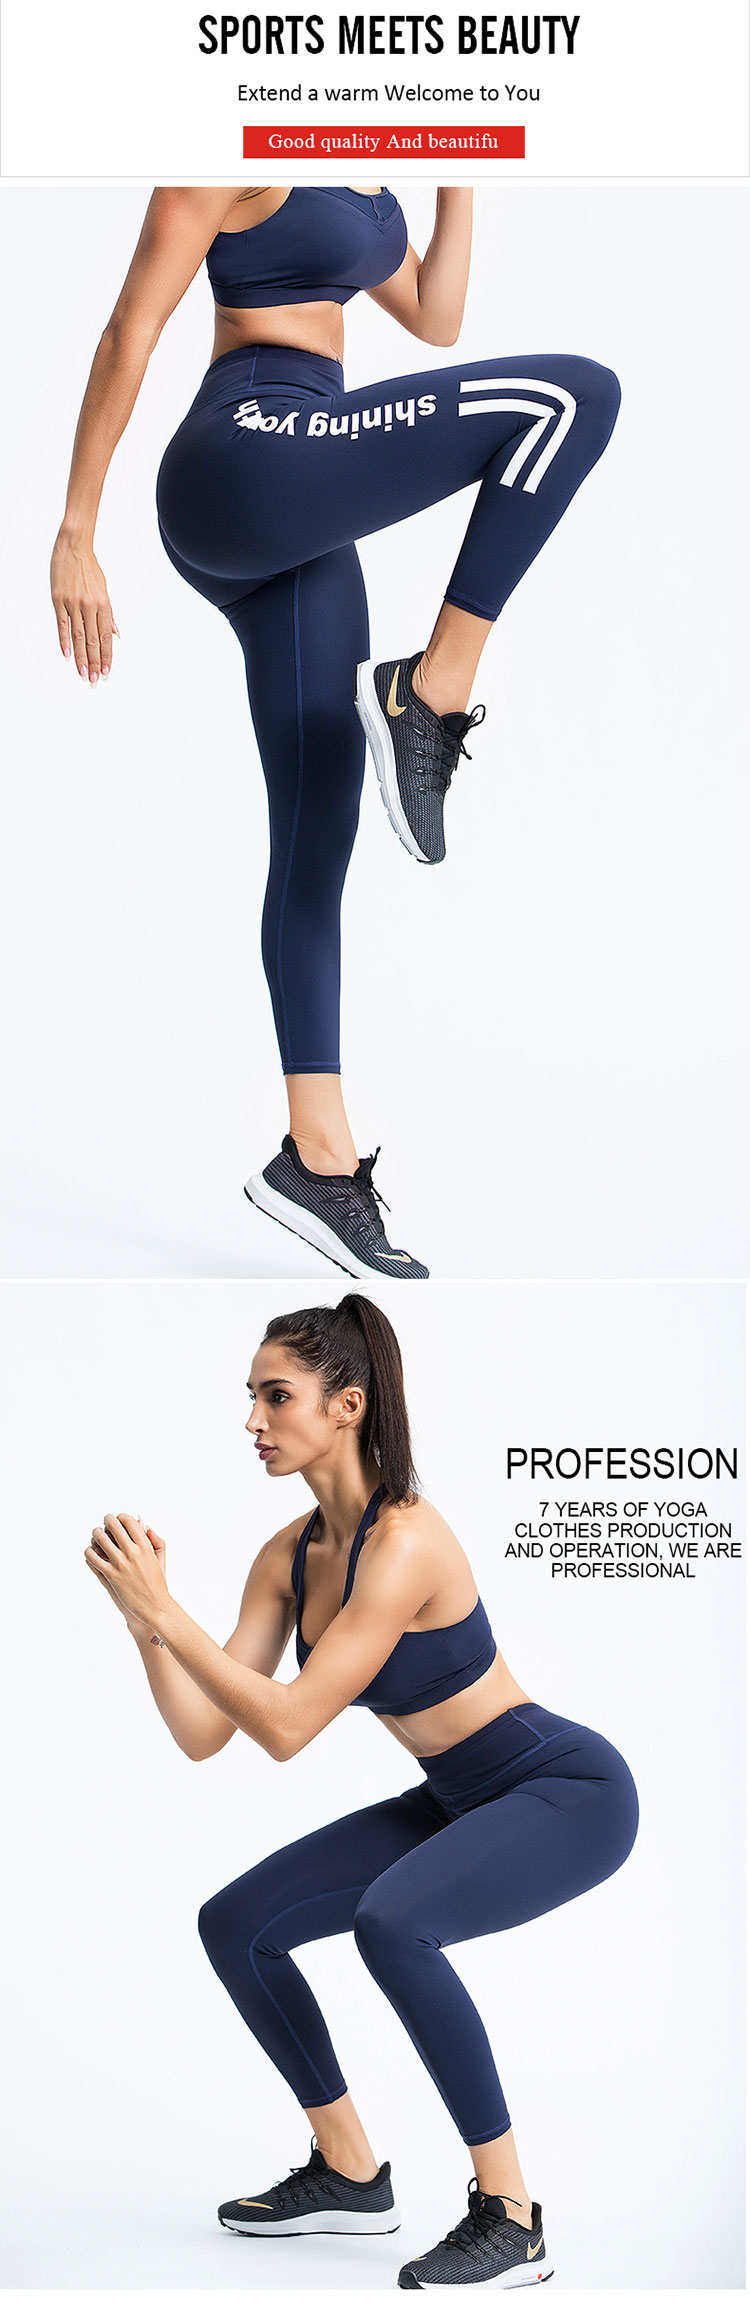 The-women's-athletic-leggings-USES-a-highly-saturated-gradient-color-to-pervade